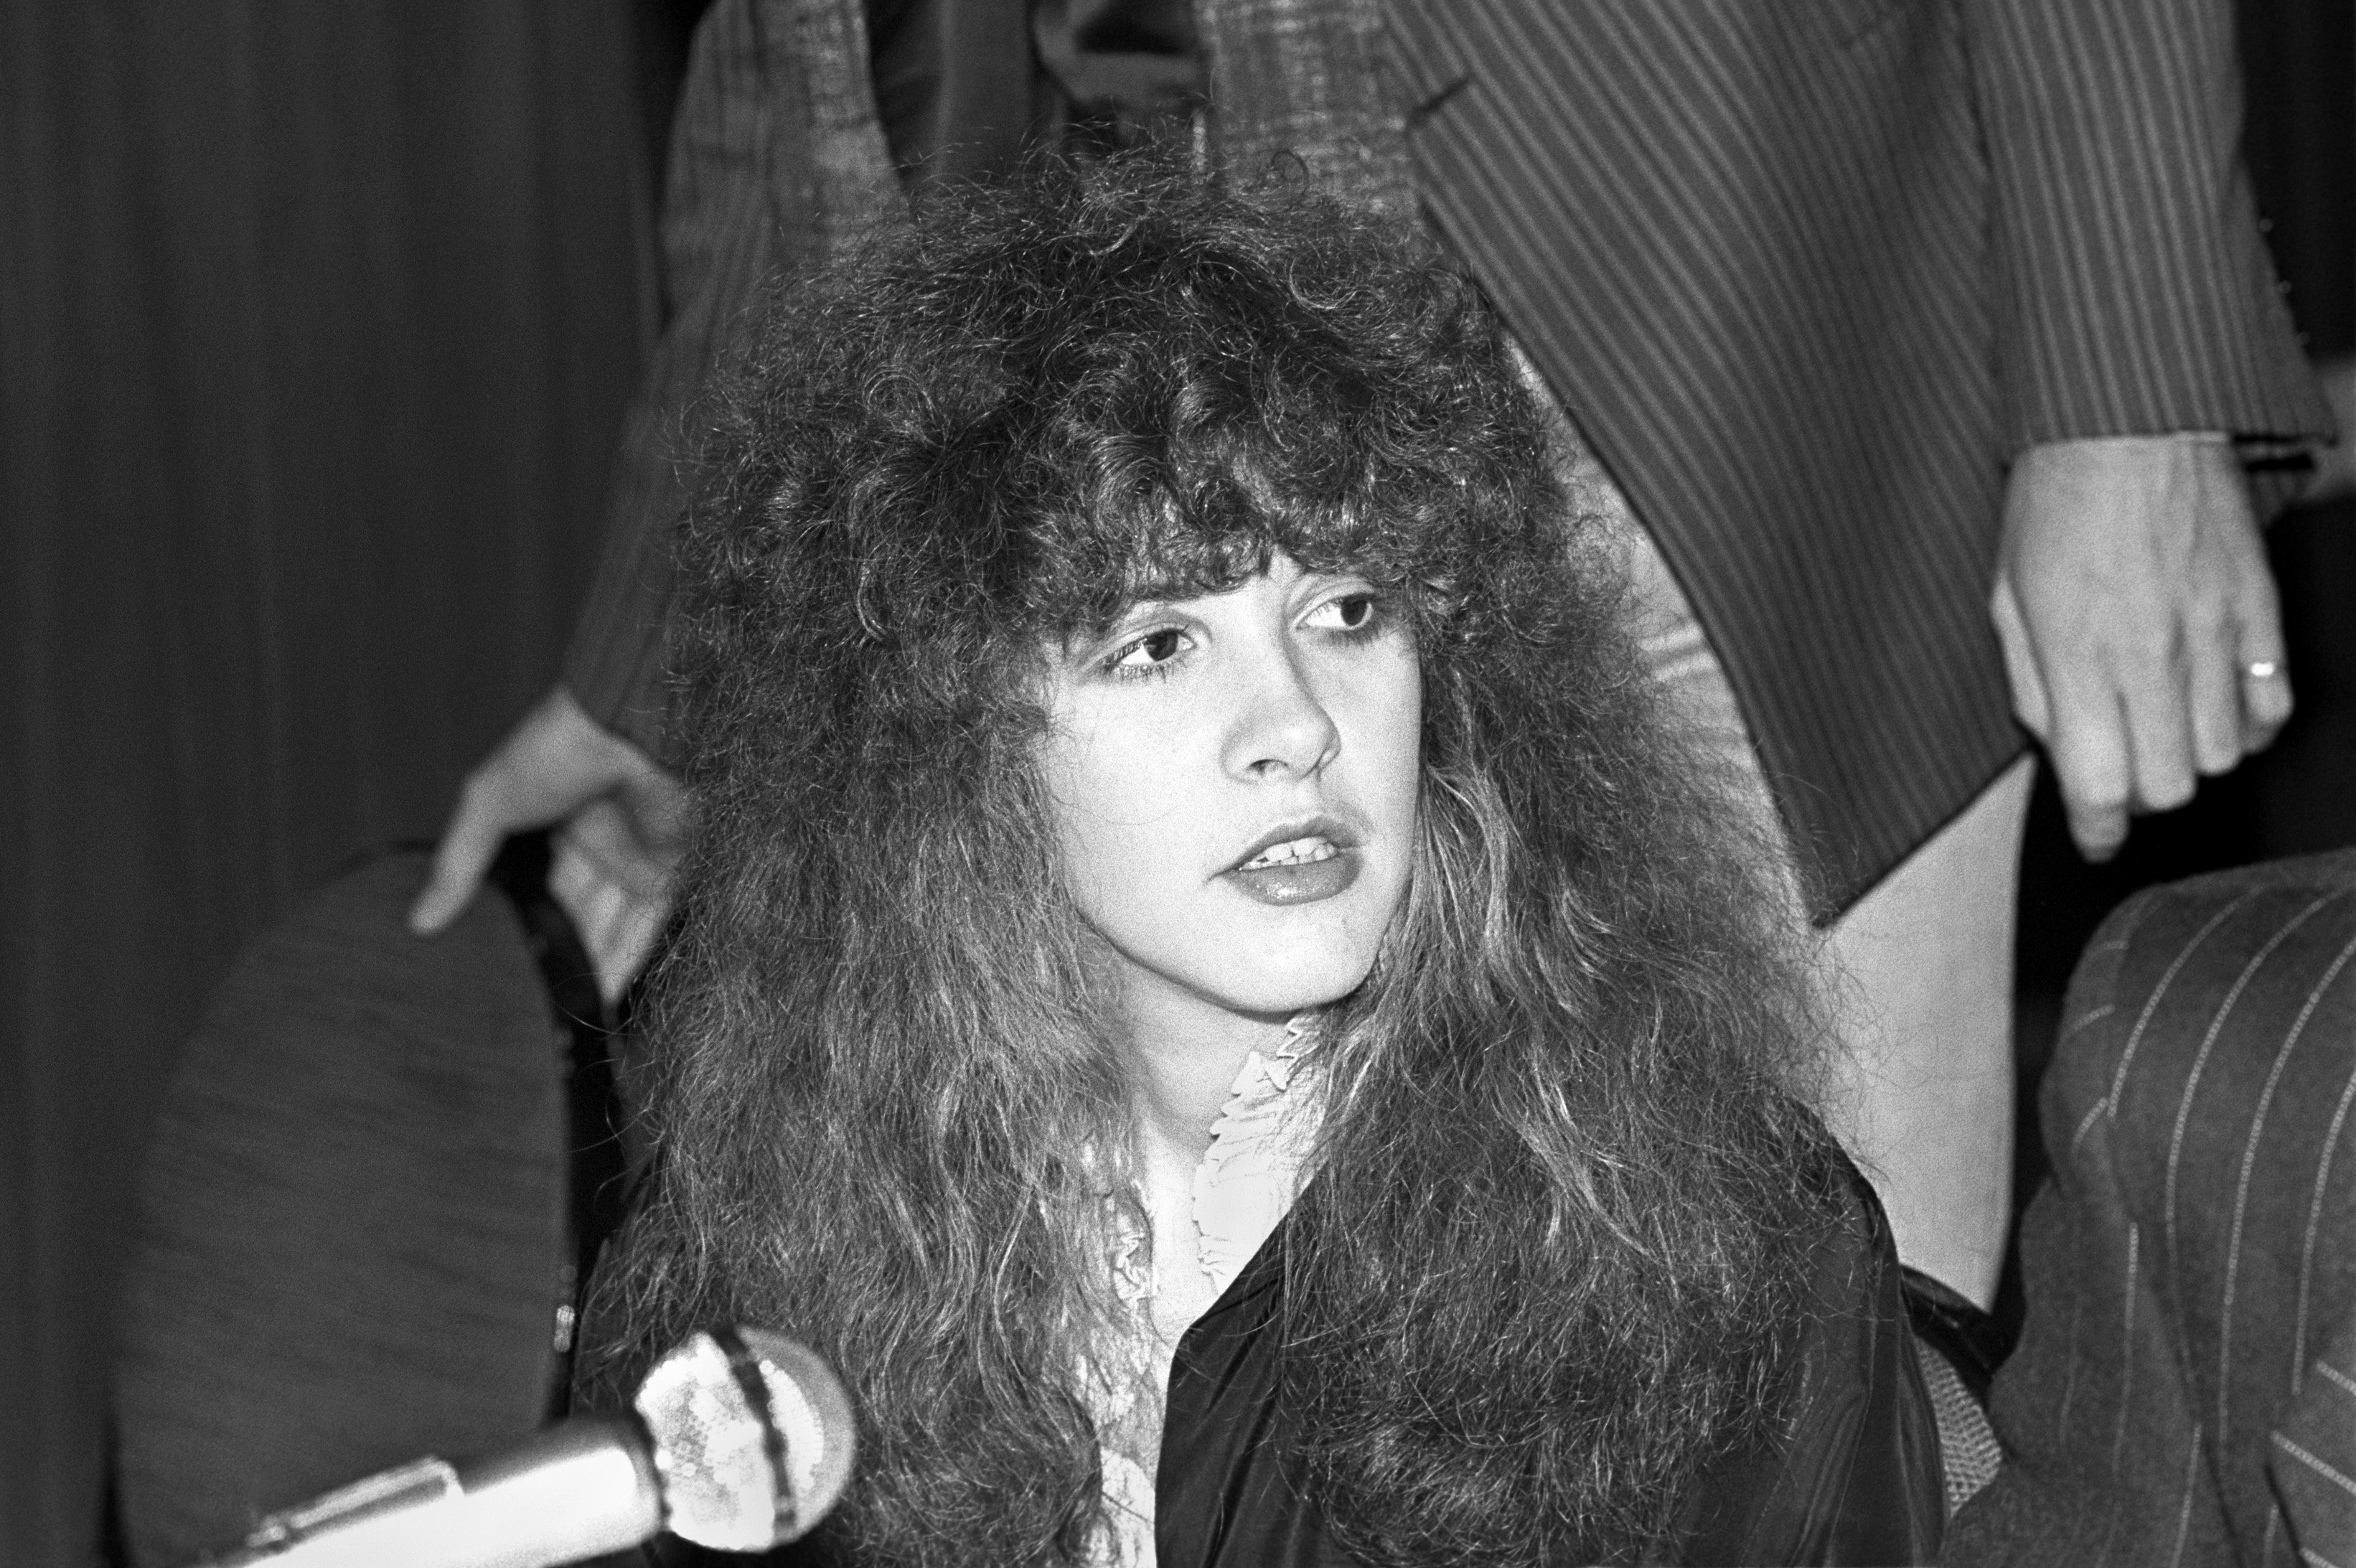 Stevie Nicks wears a white ruffled shirt and black sweater. She sits in front of a microphone. 